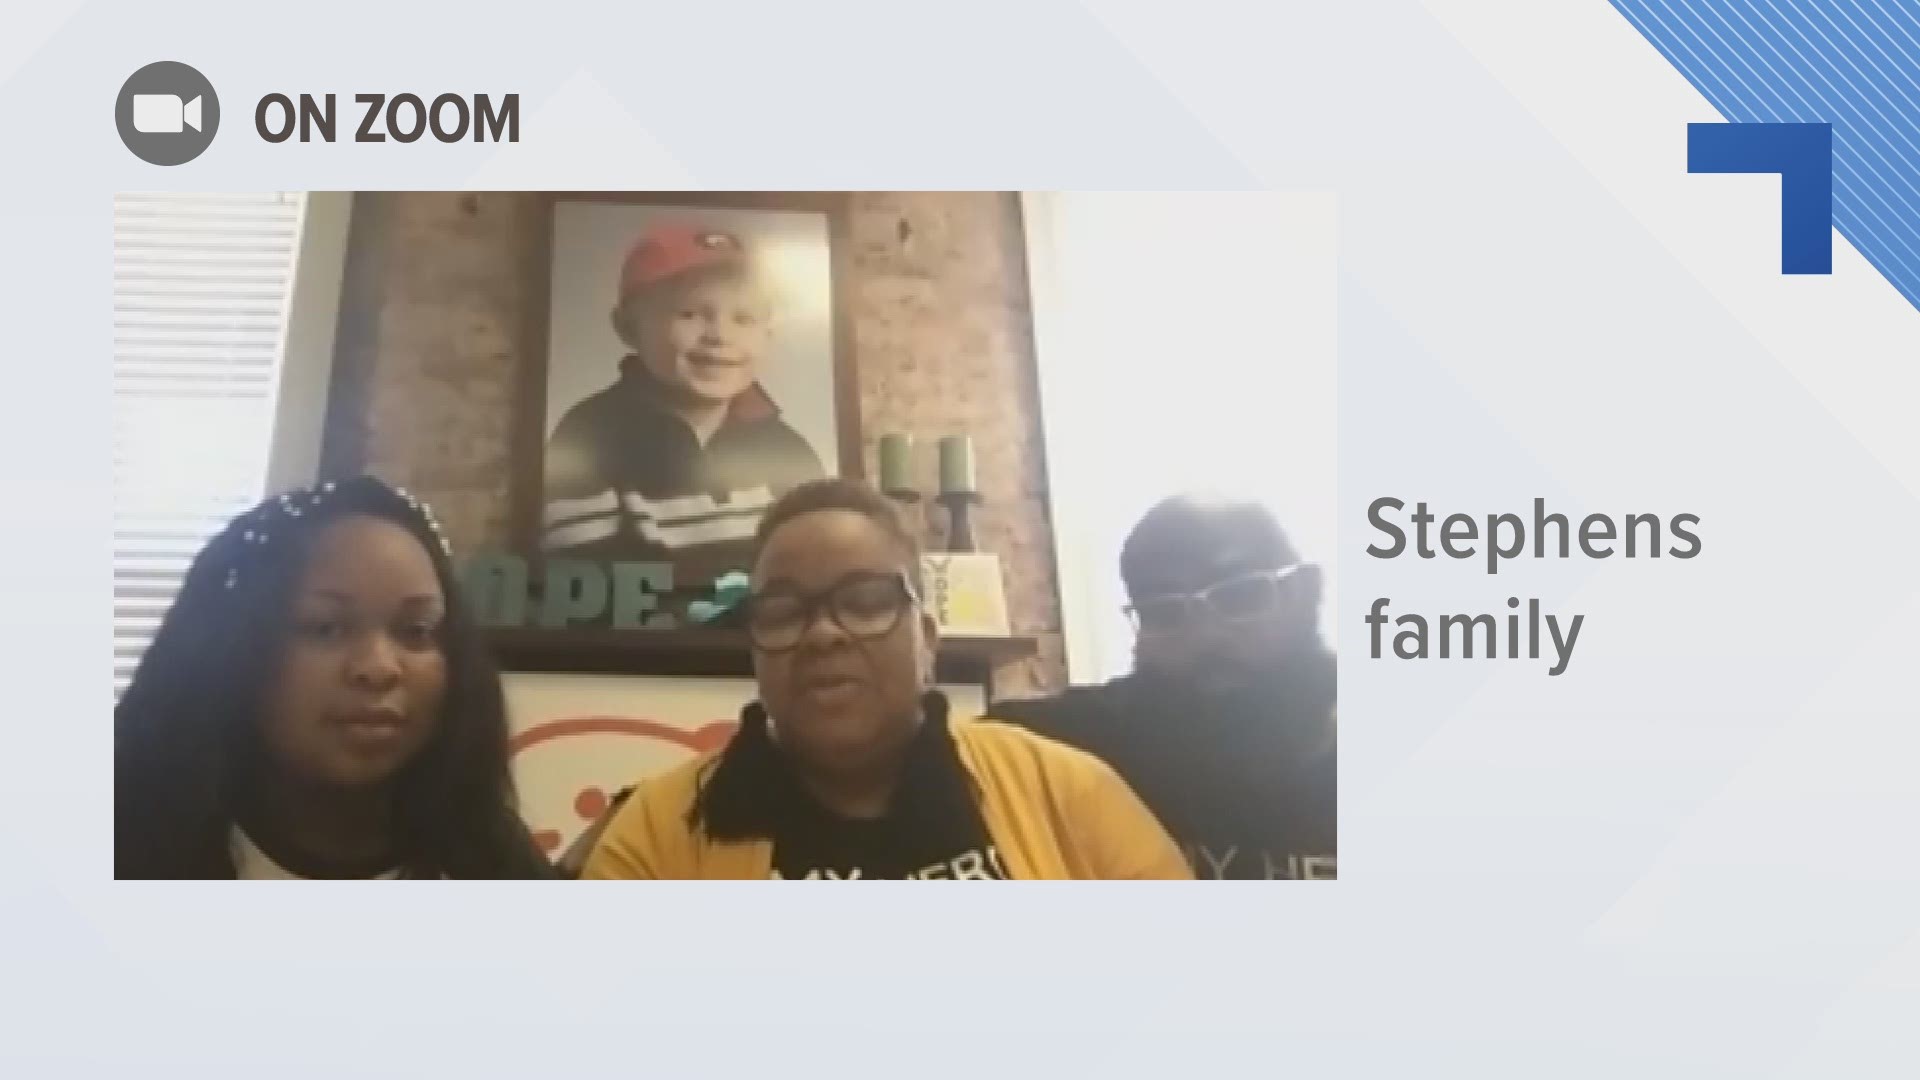 The Stephens family has battled childhood cancer, twice. Now they want to give back to the organization that helped them through those tough times.